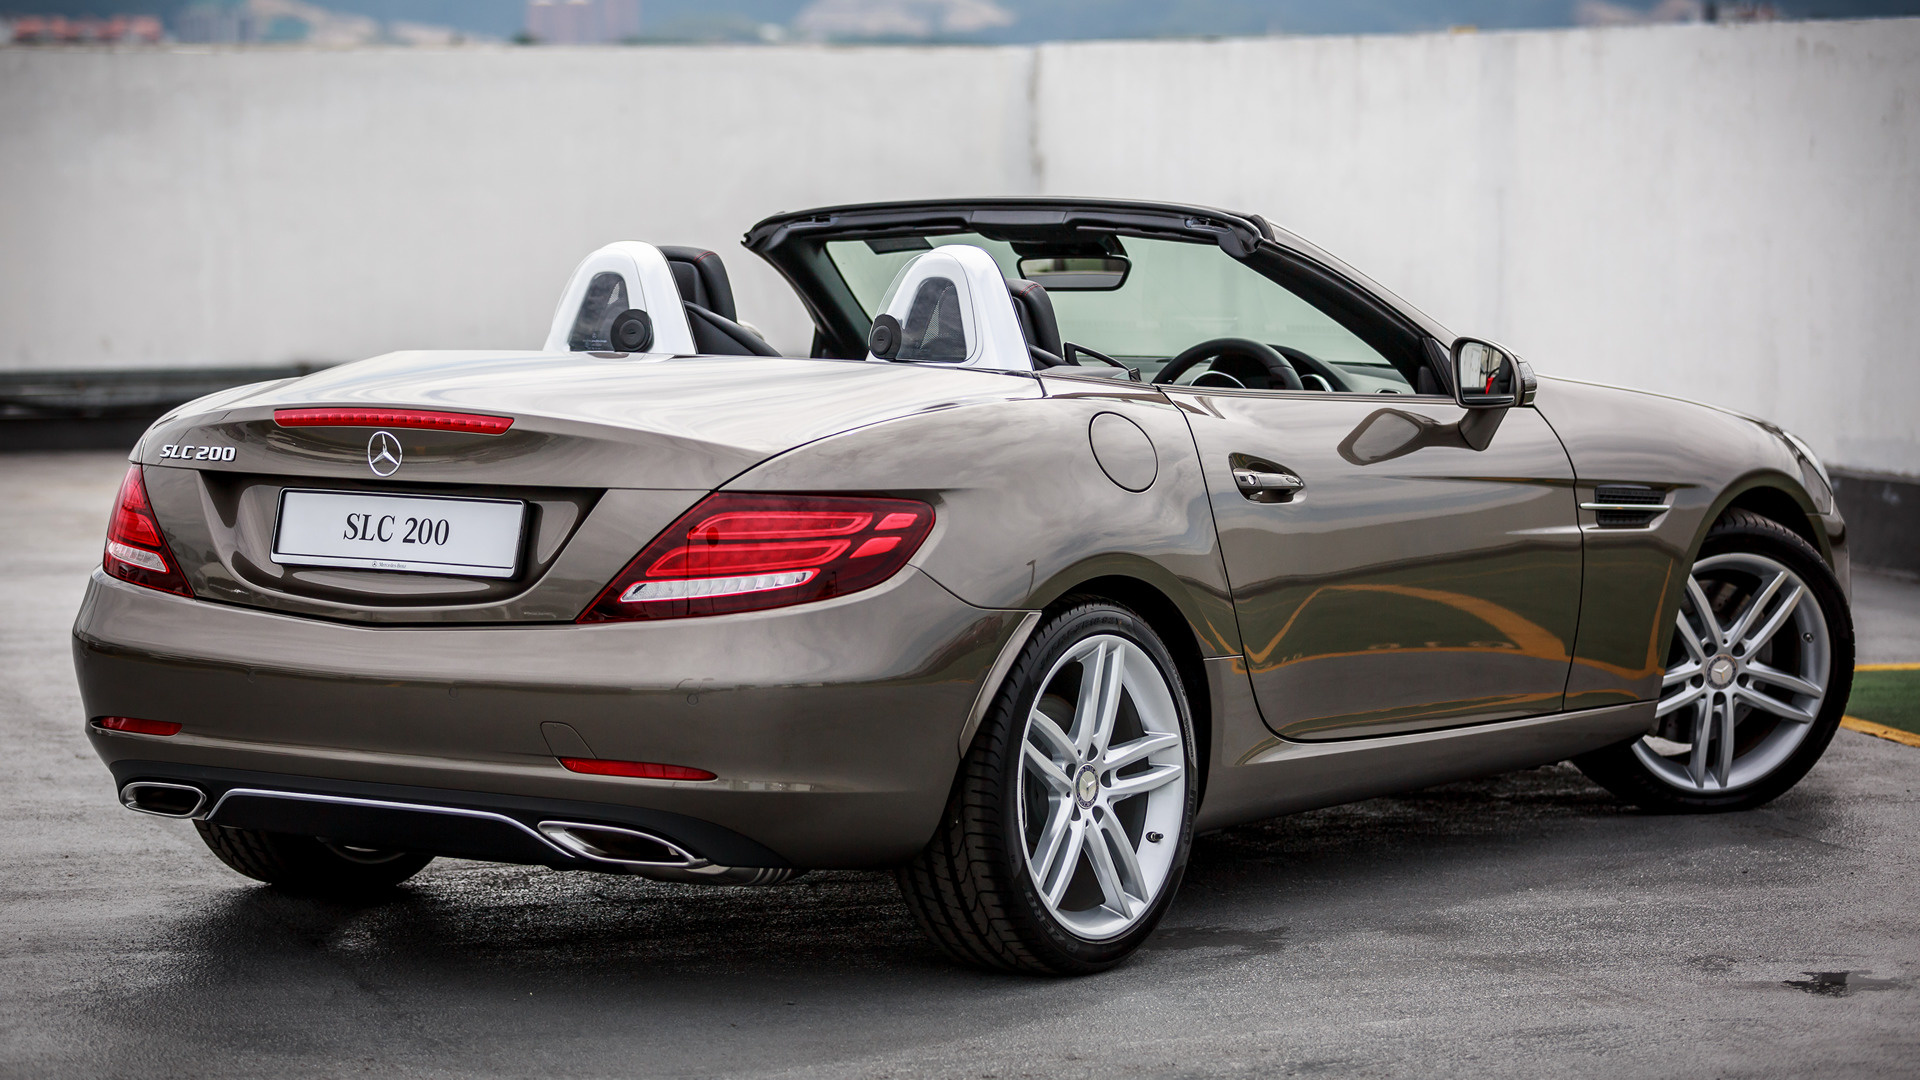 Mercedes Benz Slc Class My Wallpaper And HD Image